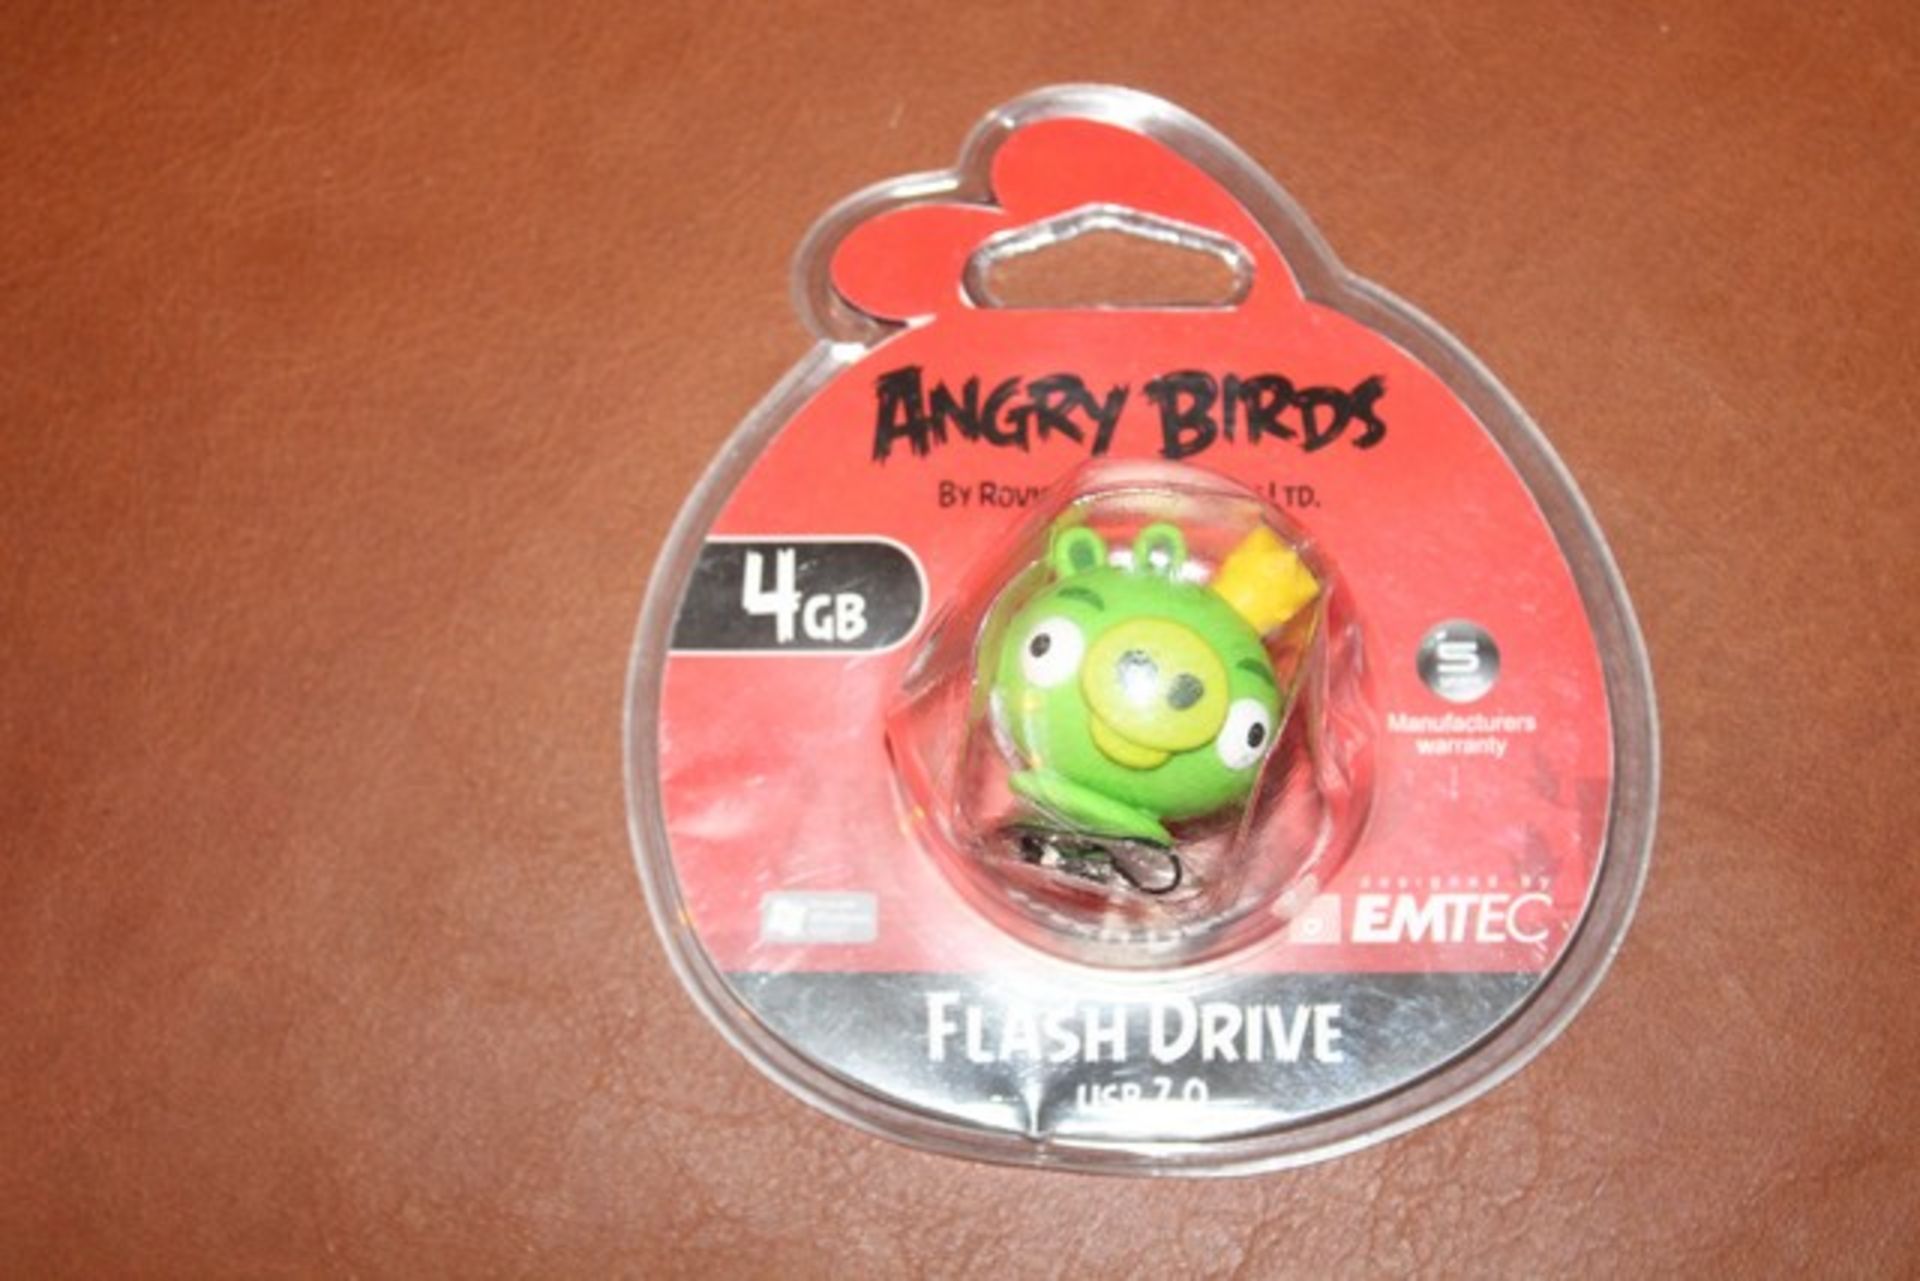 5 x BRAND NEW ASSORTED USB FLASH DRIVES   *PLEASE NOTE THAT THE BID PRICE IS MULTIPLIED BY THE